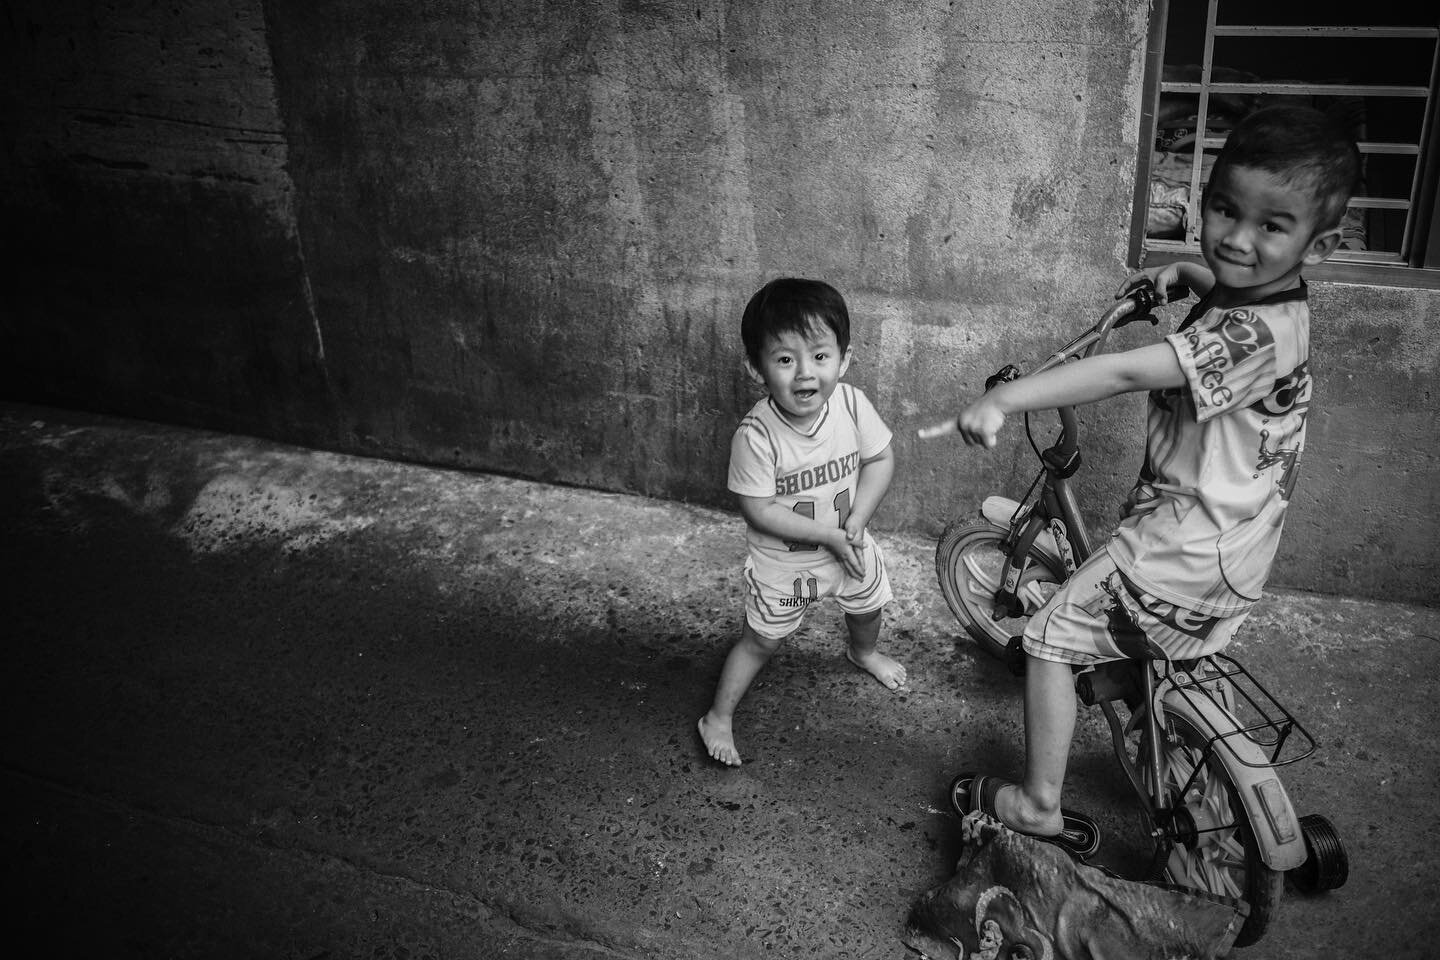 From my series &ldquo;Straight out the hood&rdquo;

Ho Chi Minh City, Vietnam | No.240103
@bricegelot &copy; #NSD5150
____